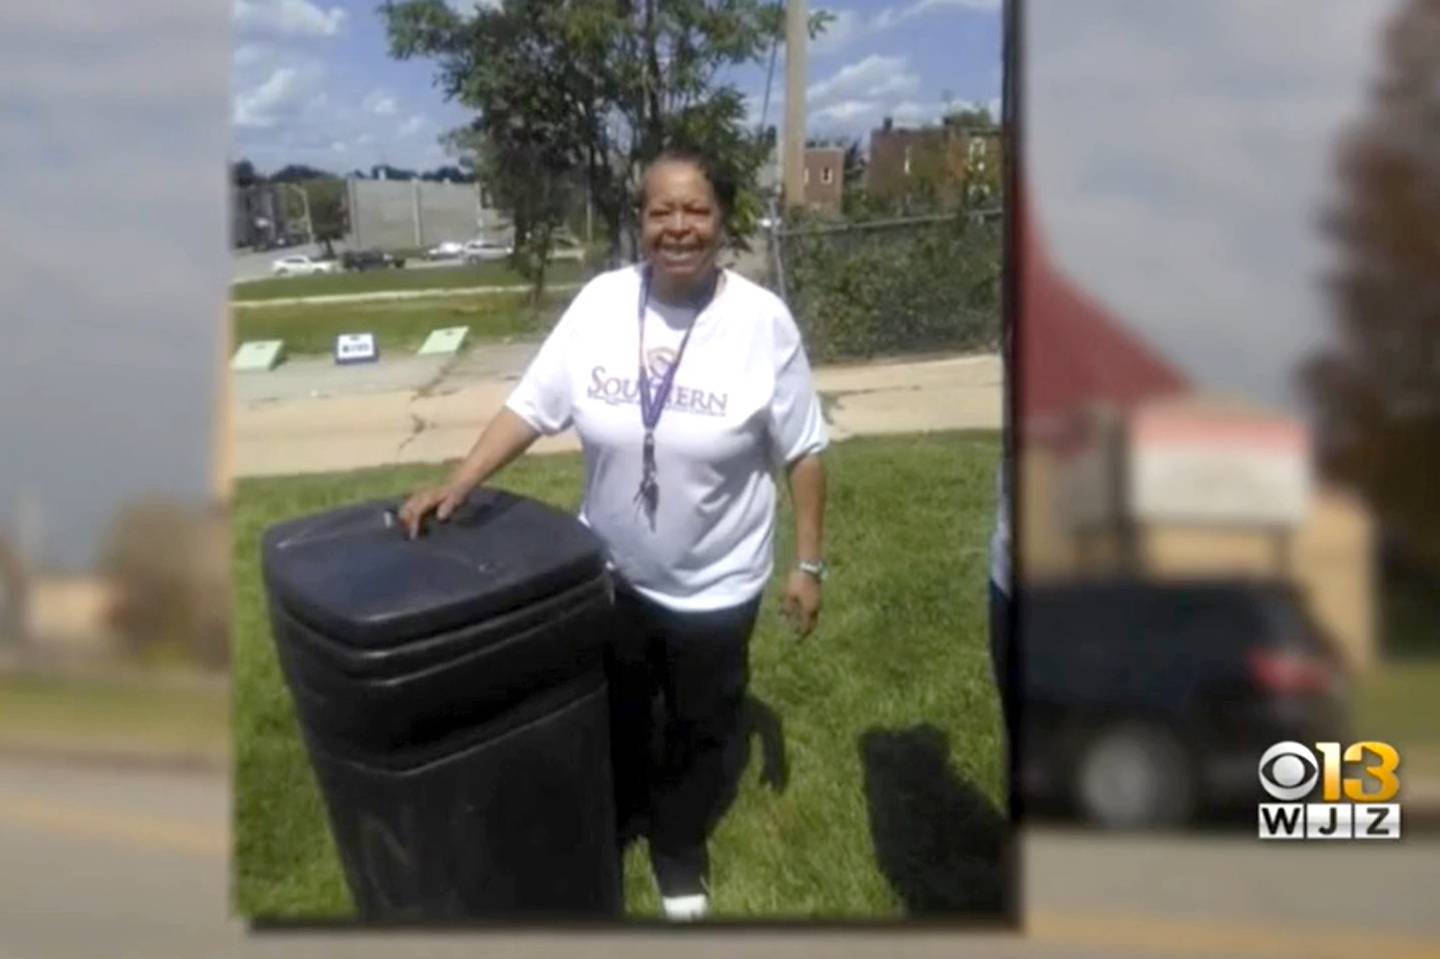 The picture is of the victim in the case, Evelyn Player, 69, of Baltimore. Caption (if we need to go into detail): "Evelyn Player, a volunteer at Southern Baptist Church in Baltimore, was fatally stabbed on Nov. 16, 2021. She was 69."